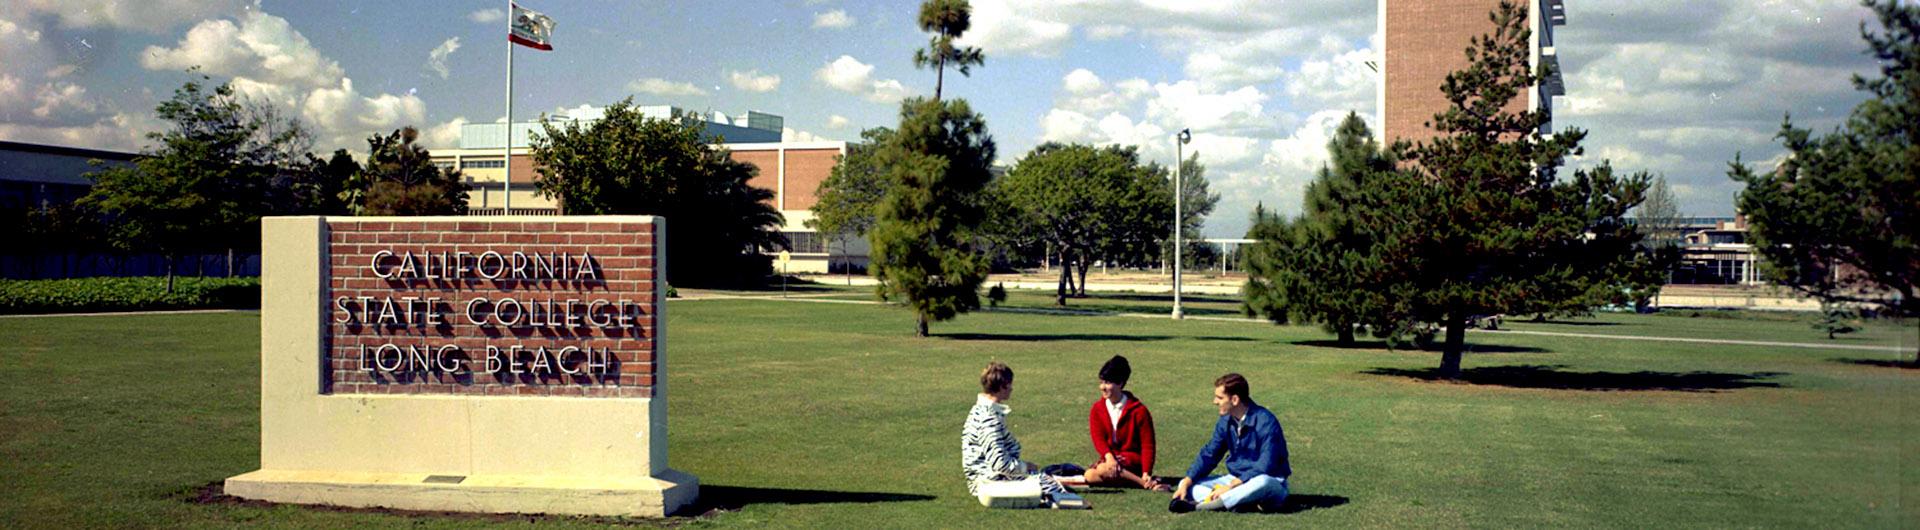 1960's campus image, students on the lawn